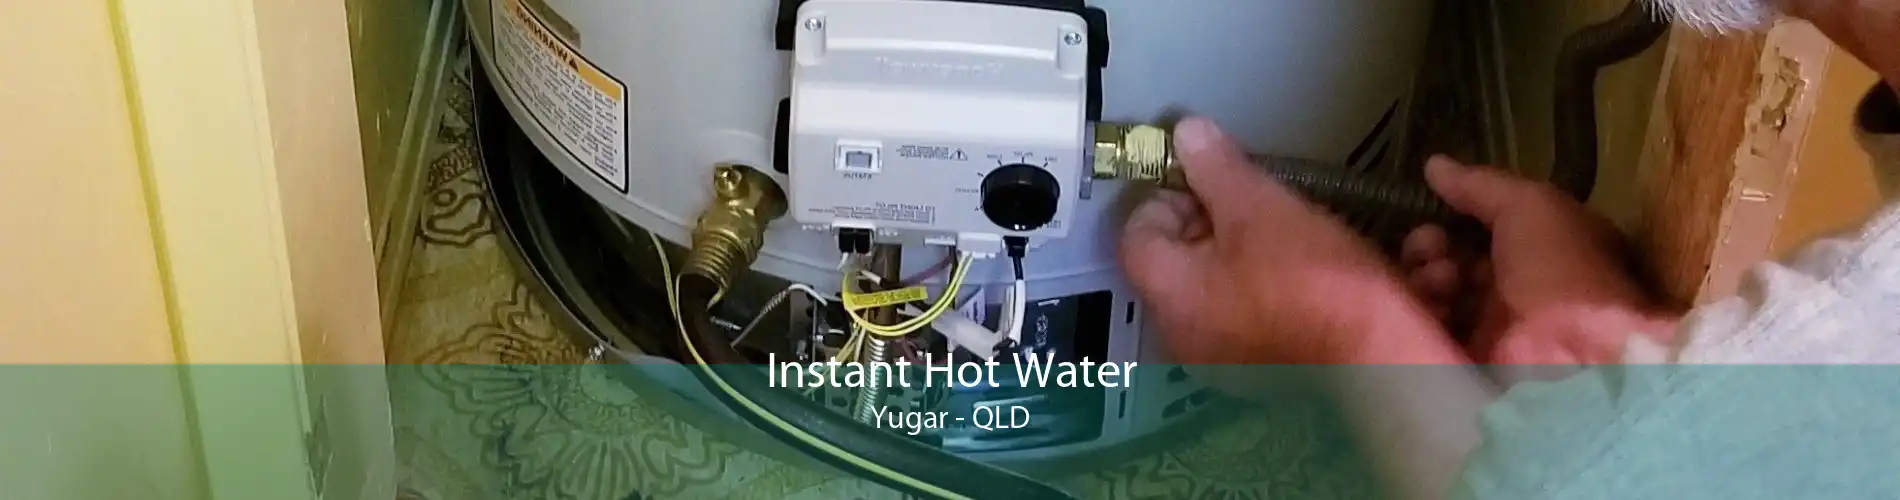 Instant Hot Water Yugar - QLD